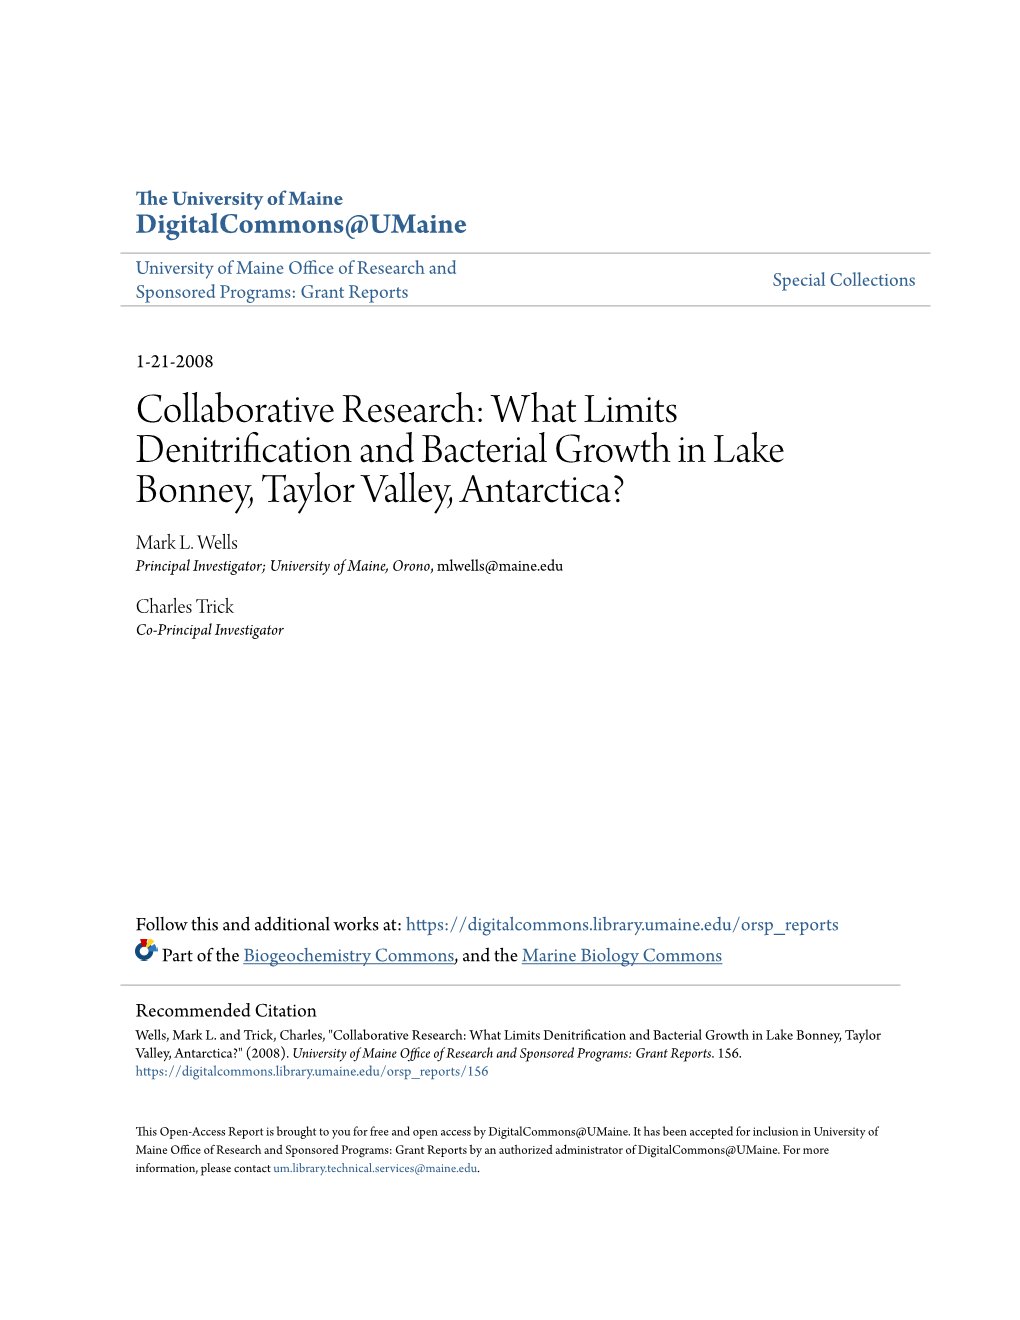 Collaborative Research: What Limits Denitrification and Bacterial Growth in Lake Bonney, Taylor Valley, Antarctica? Mark L